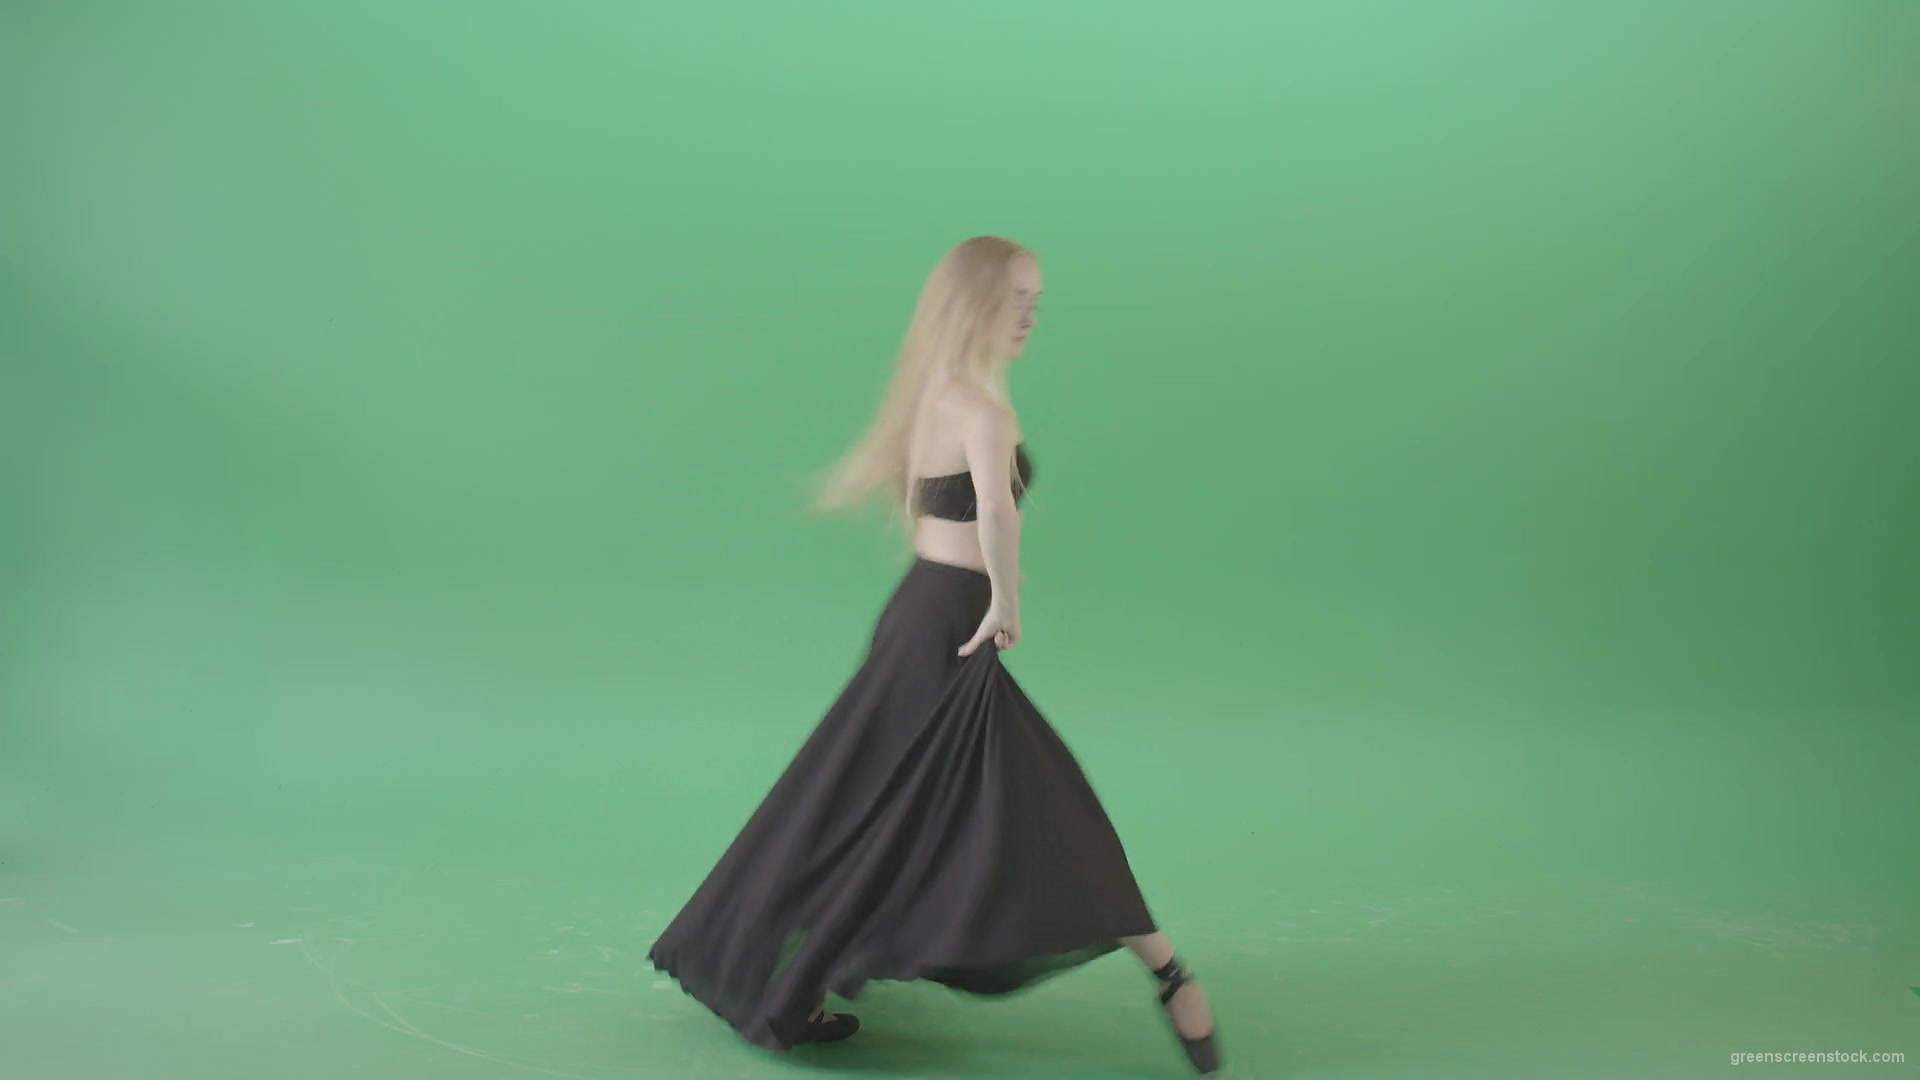 Hot-passion-ballet-girl-in-black-dress-dancing-on-green-screen-4K-Video-Footage-1920_009 Green Screen Stock